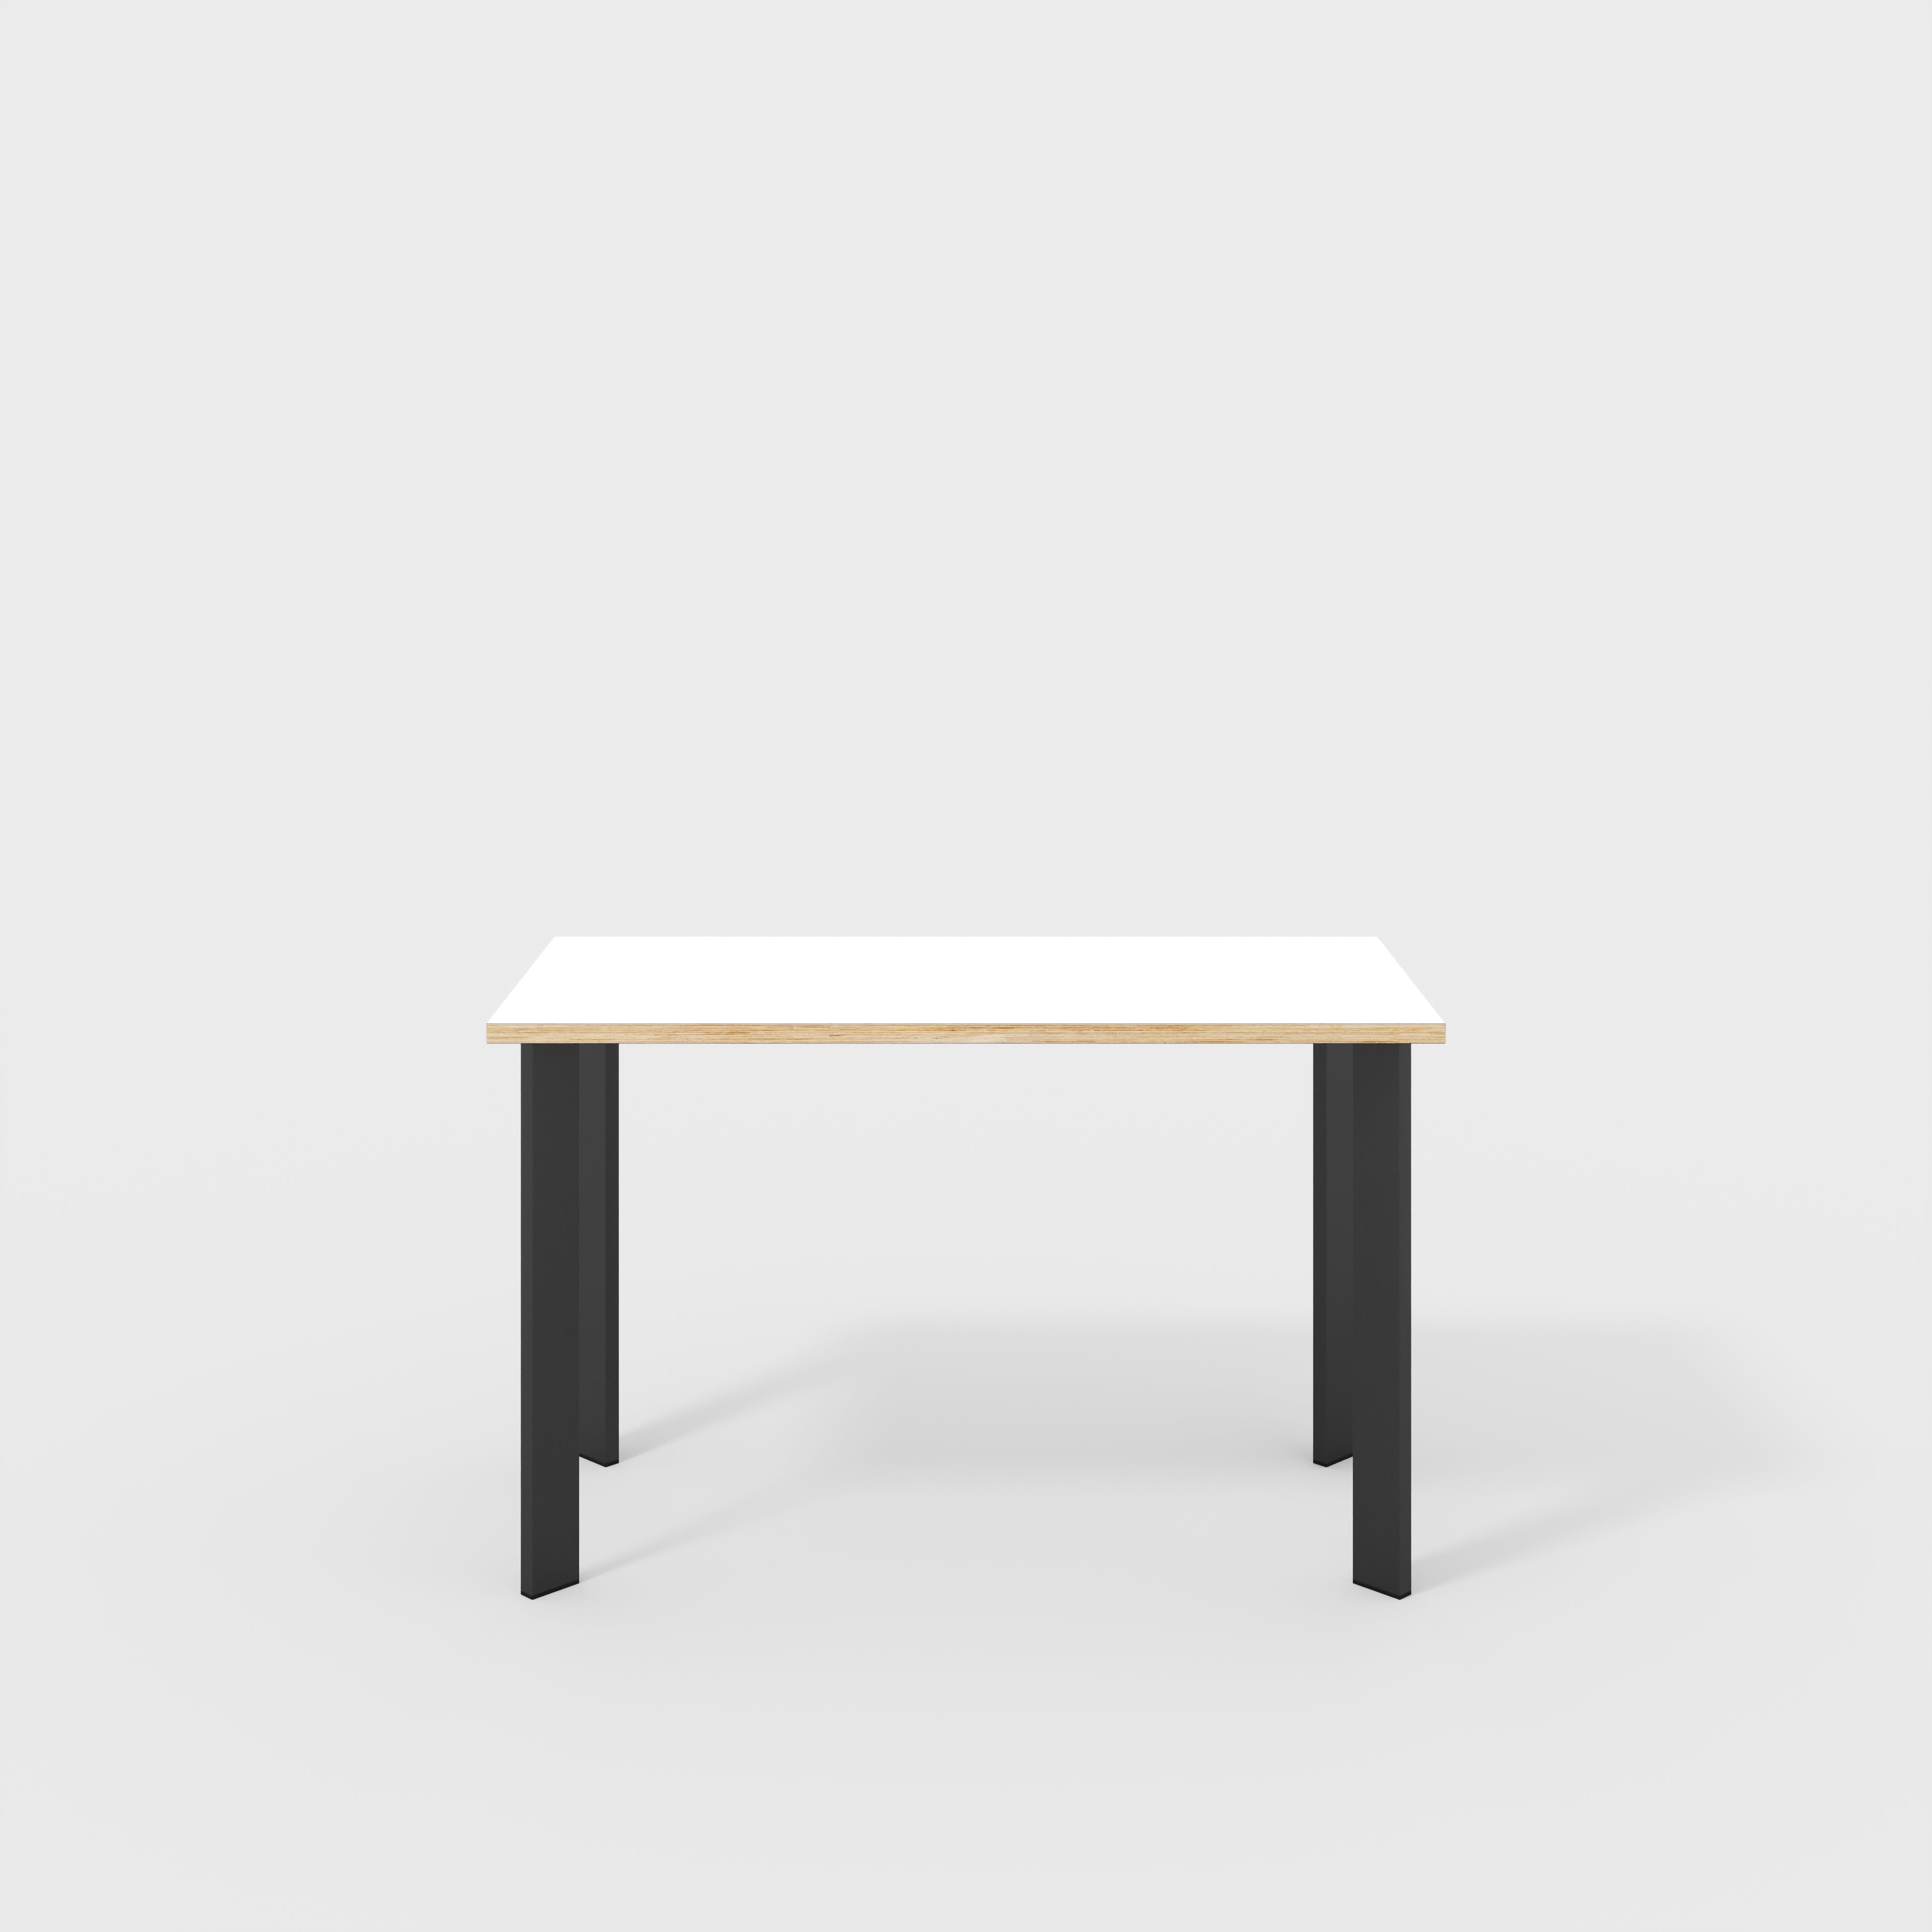 Desk with Black Rectangular Single Pin Legs - Formica White - 1200(w) x 600(d) x 735(h)